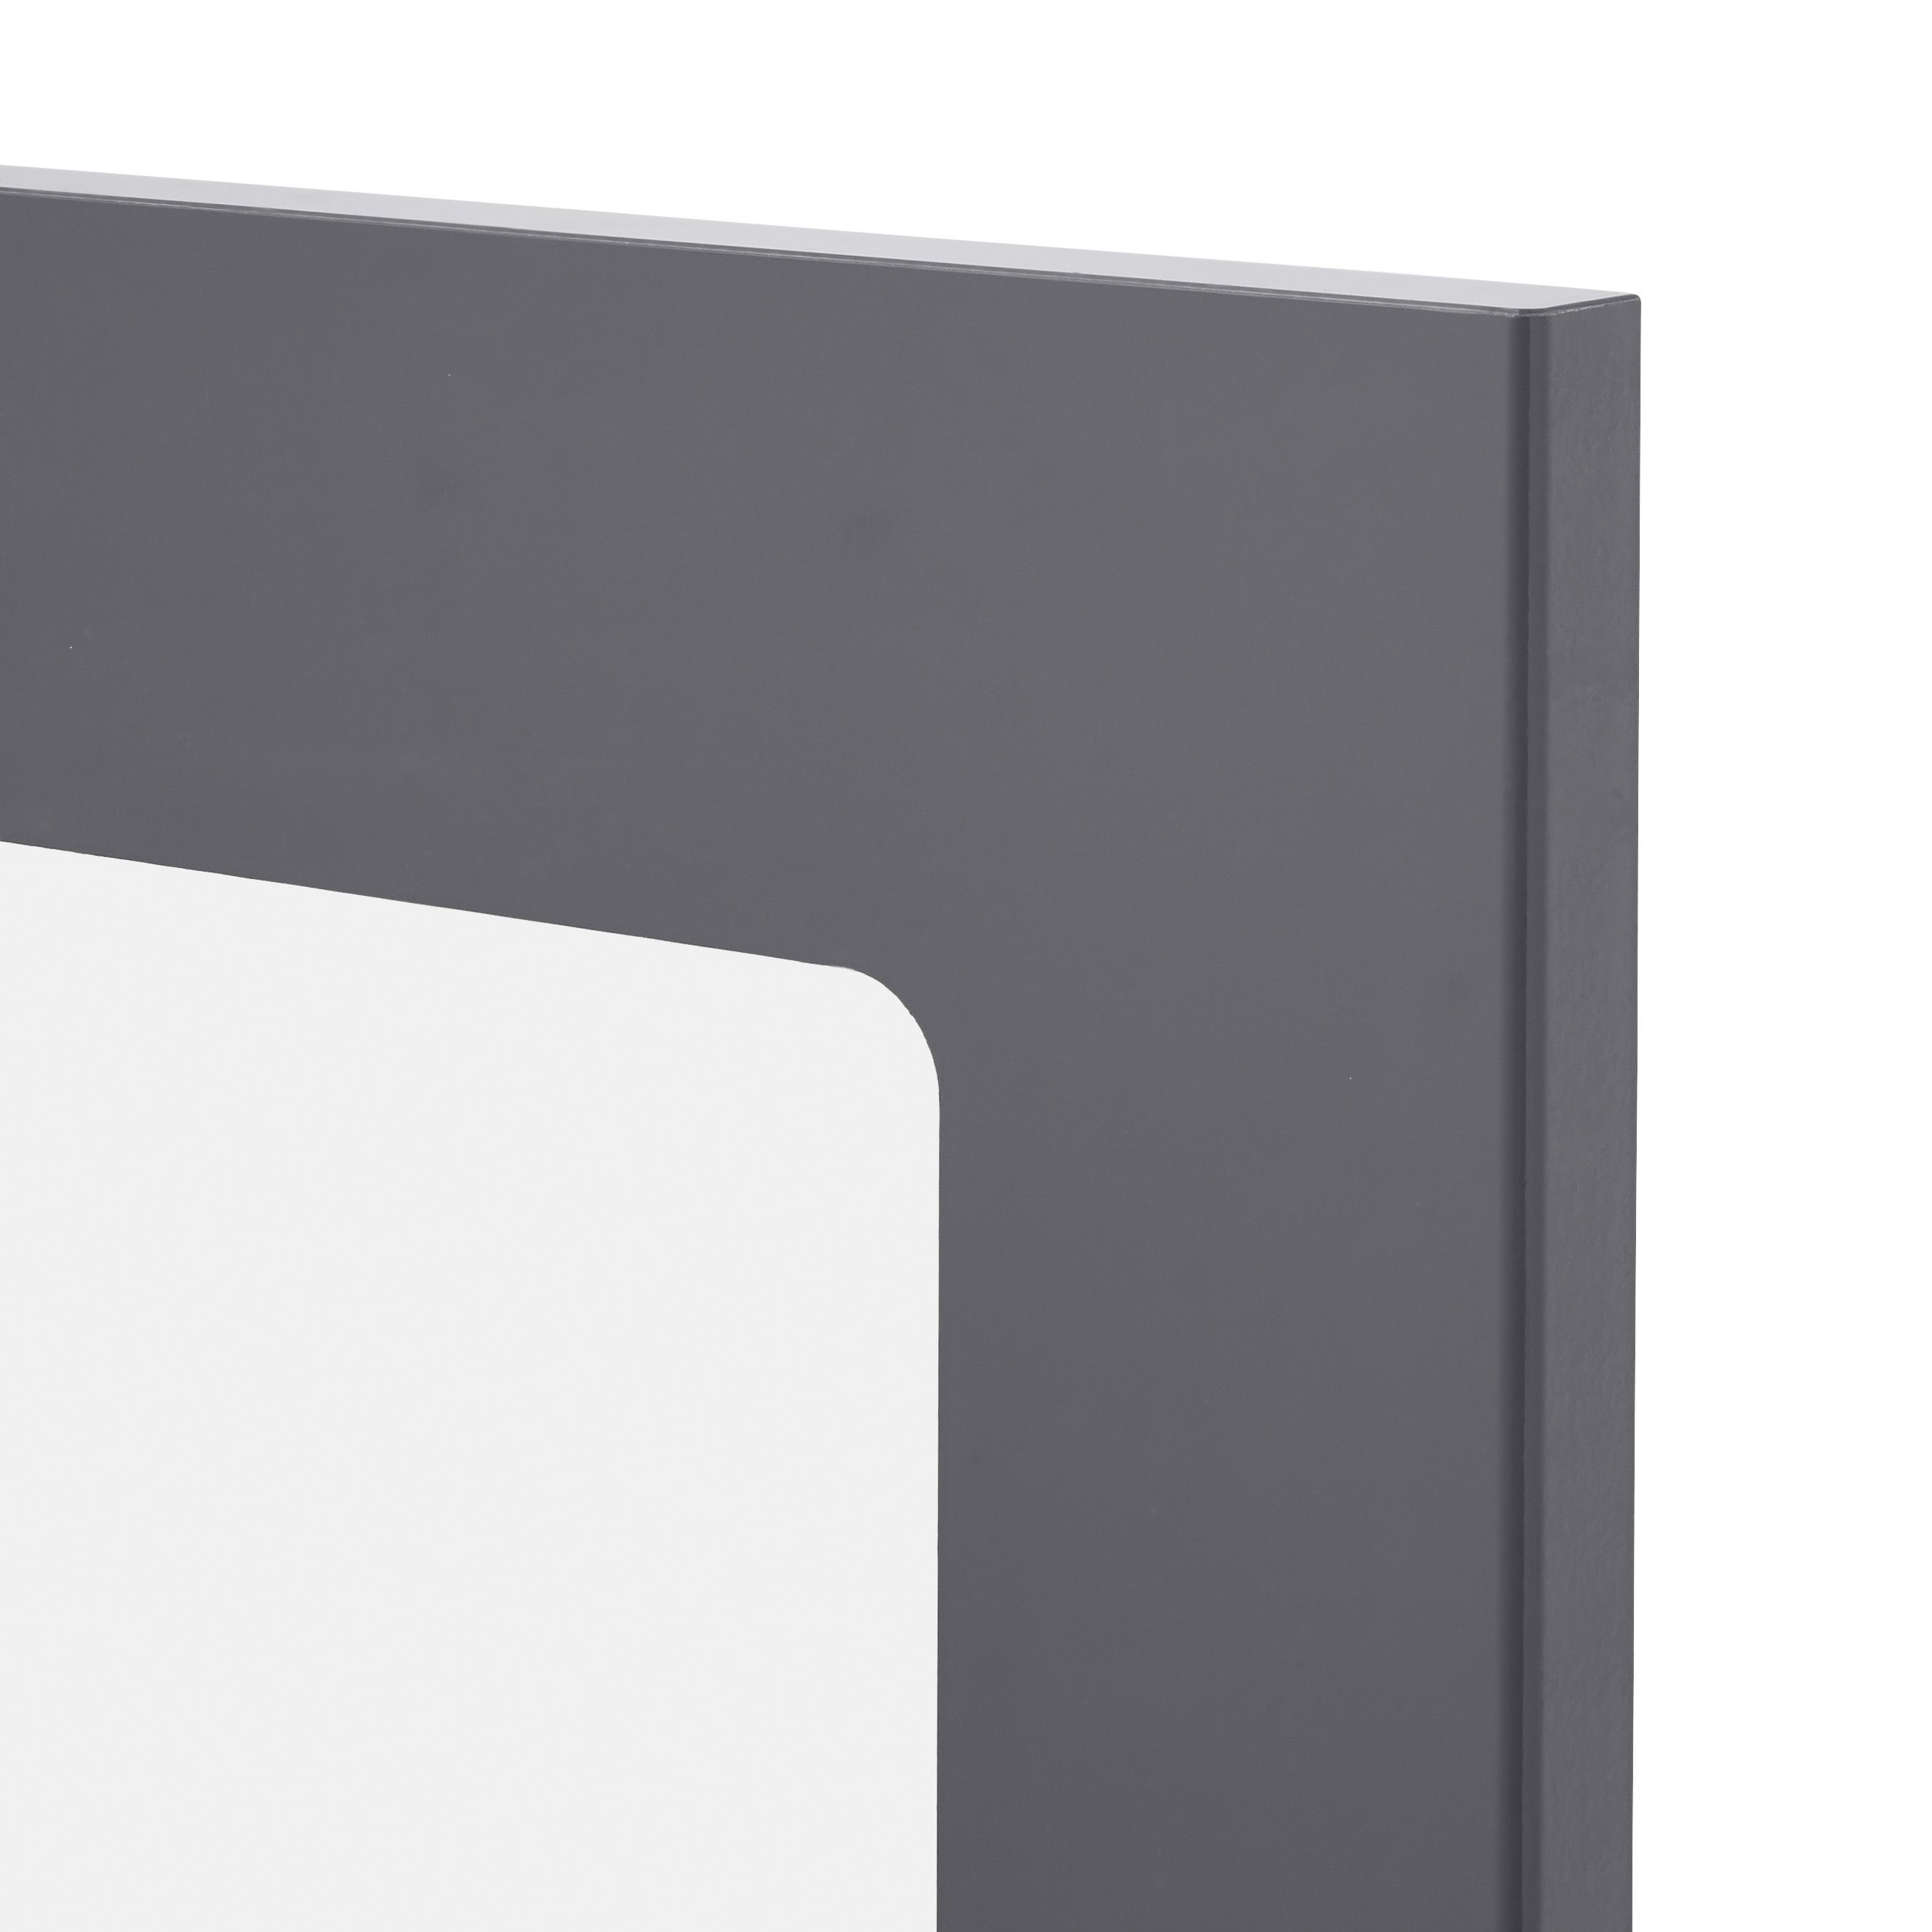 GoodHome Stevia Gloss anthracite slab Glazed Cabinet door (W)300mm (H)715mm (T)18mm